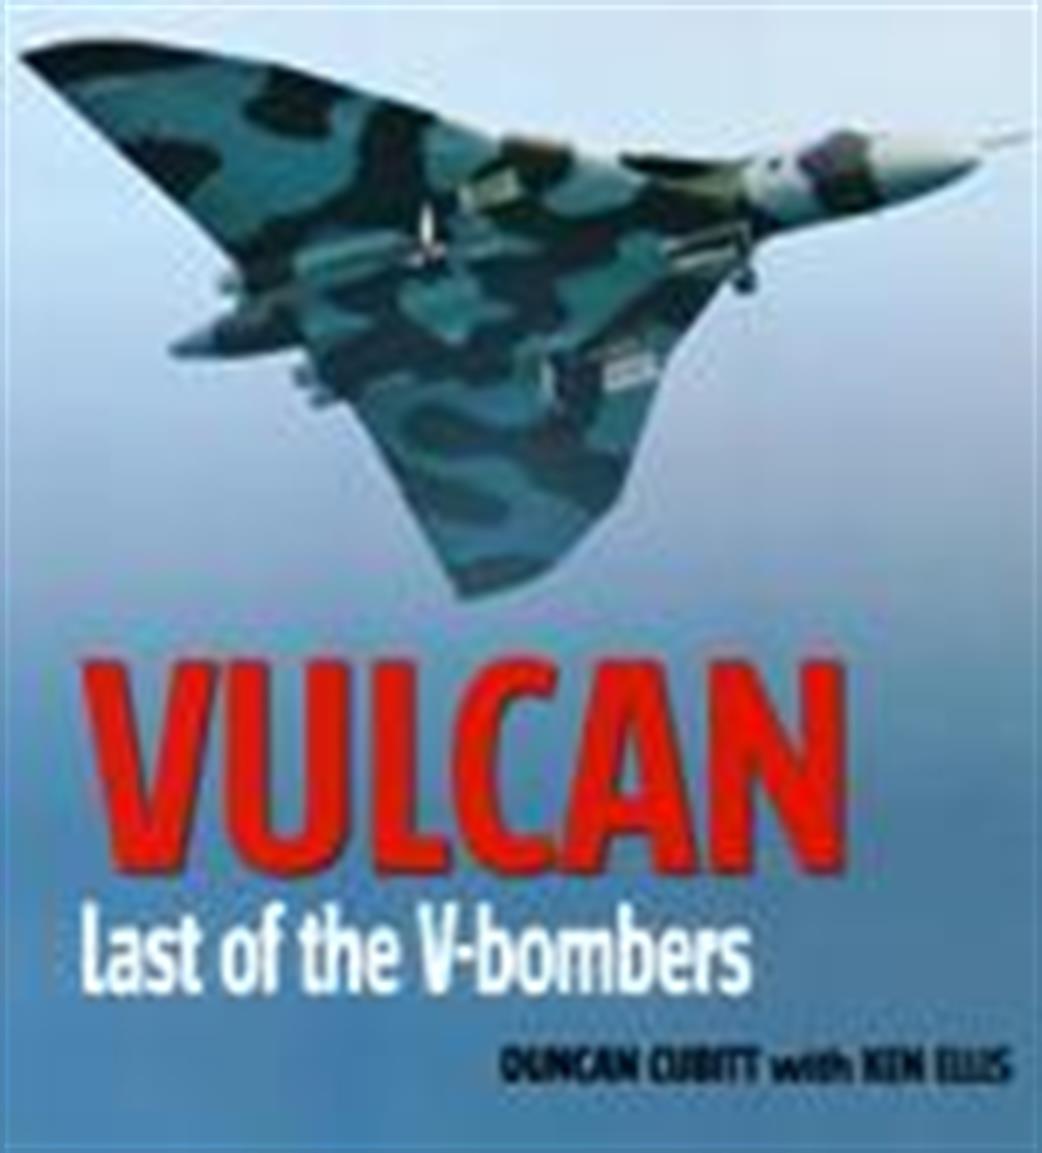 9780753728932 Vulcan Last Of The V-Bombers By Peter Dancey